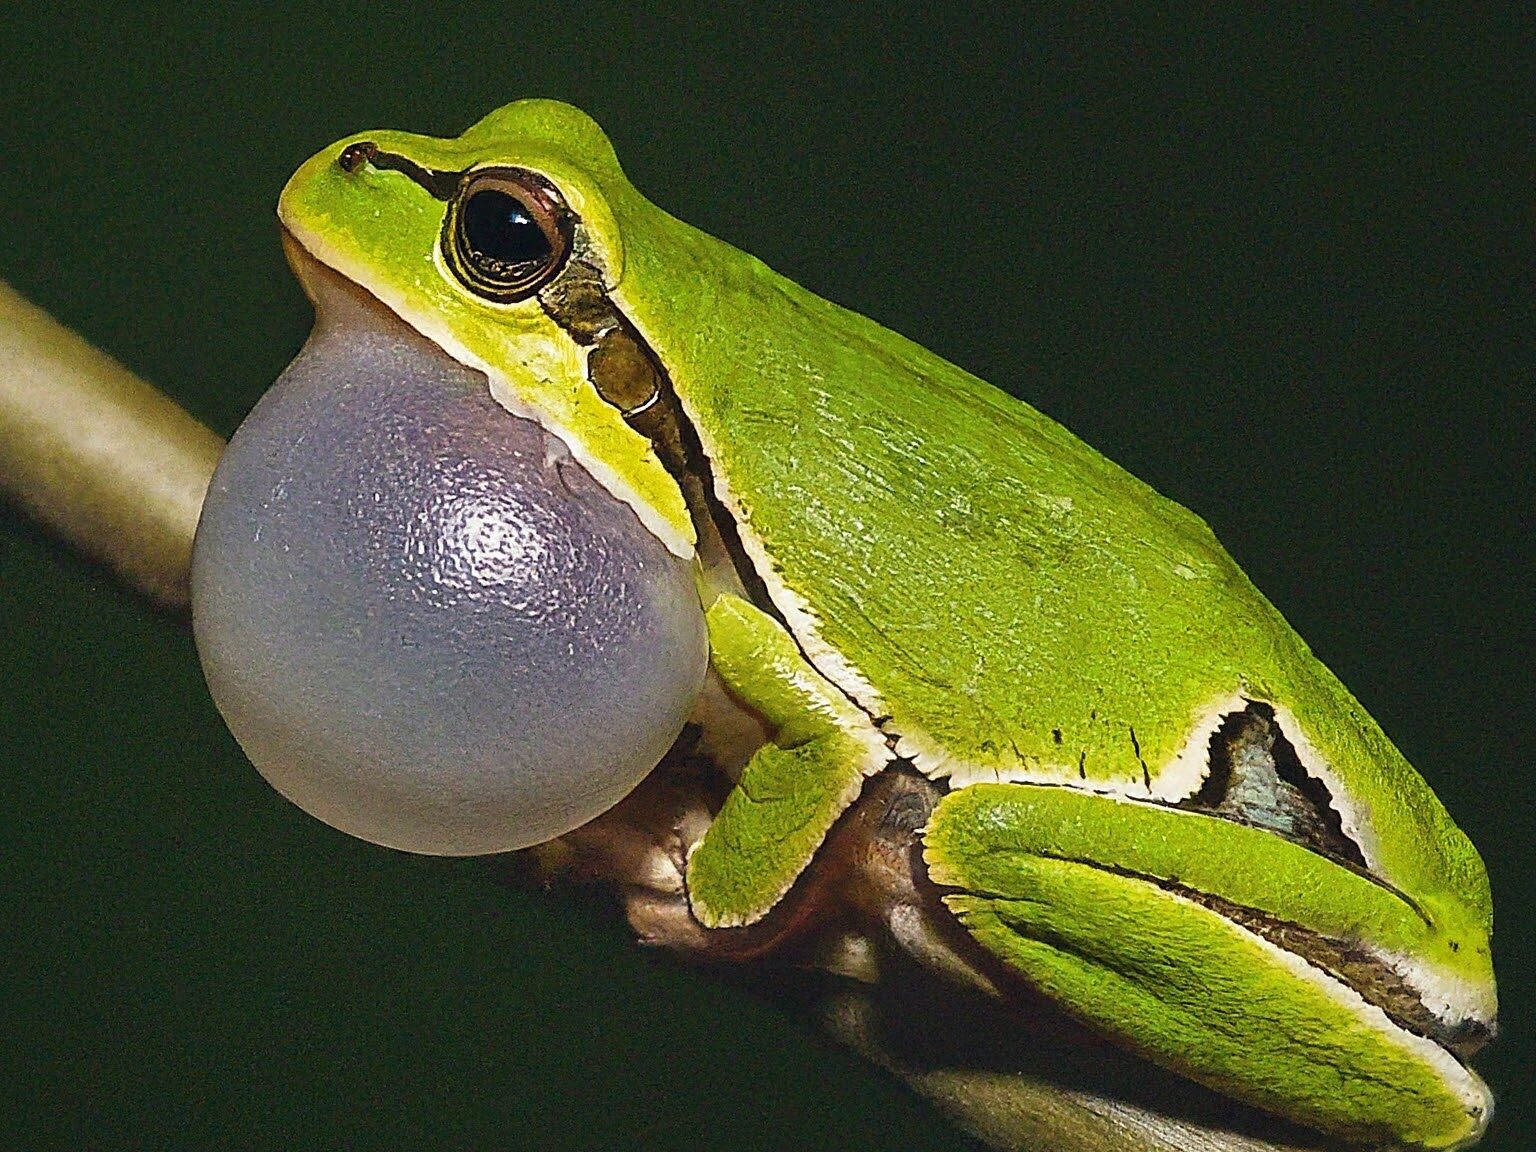 Michigan tree frog calling at night with vocal sac expanded.